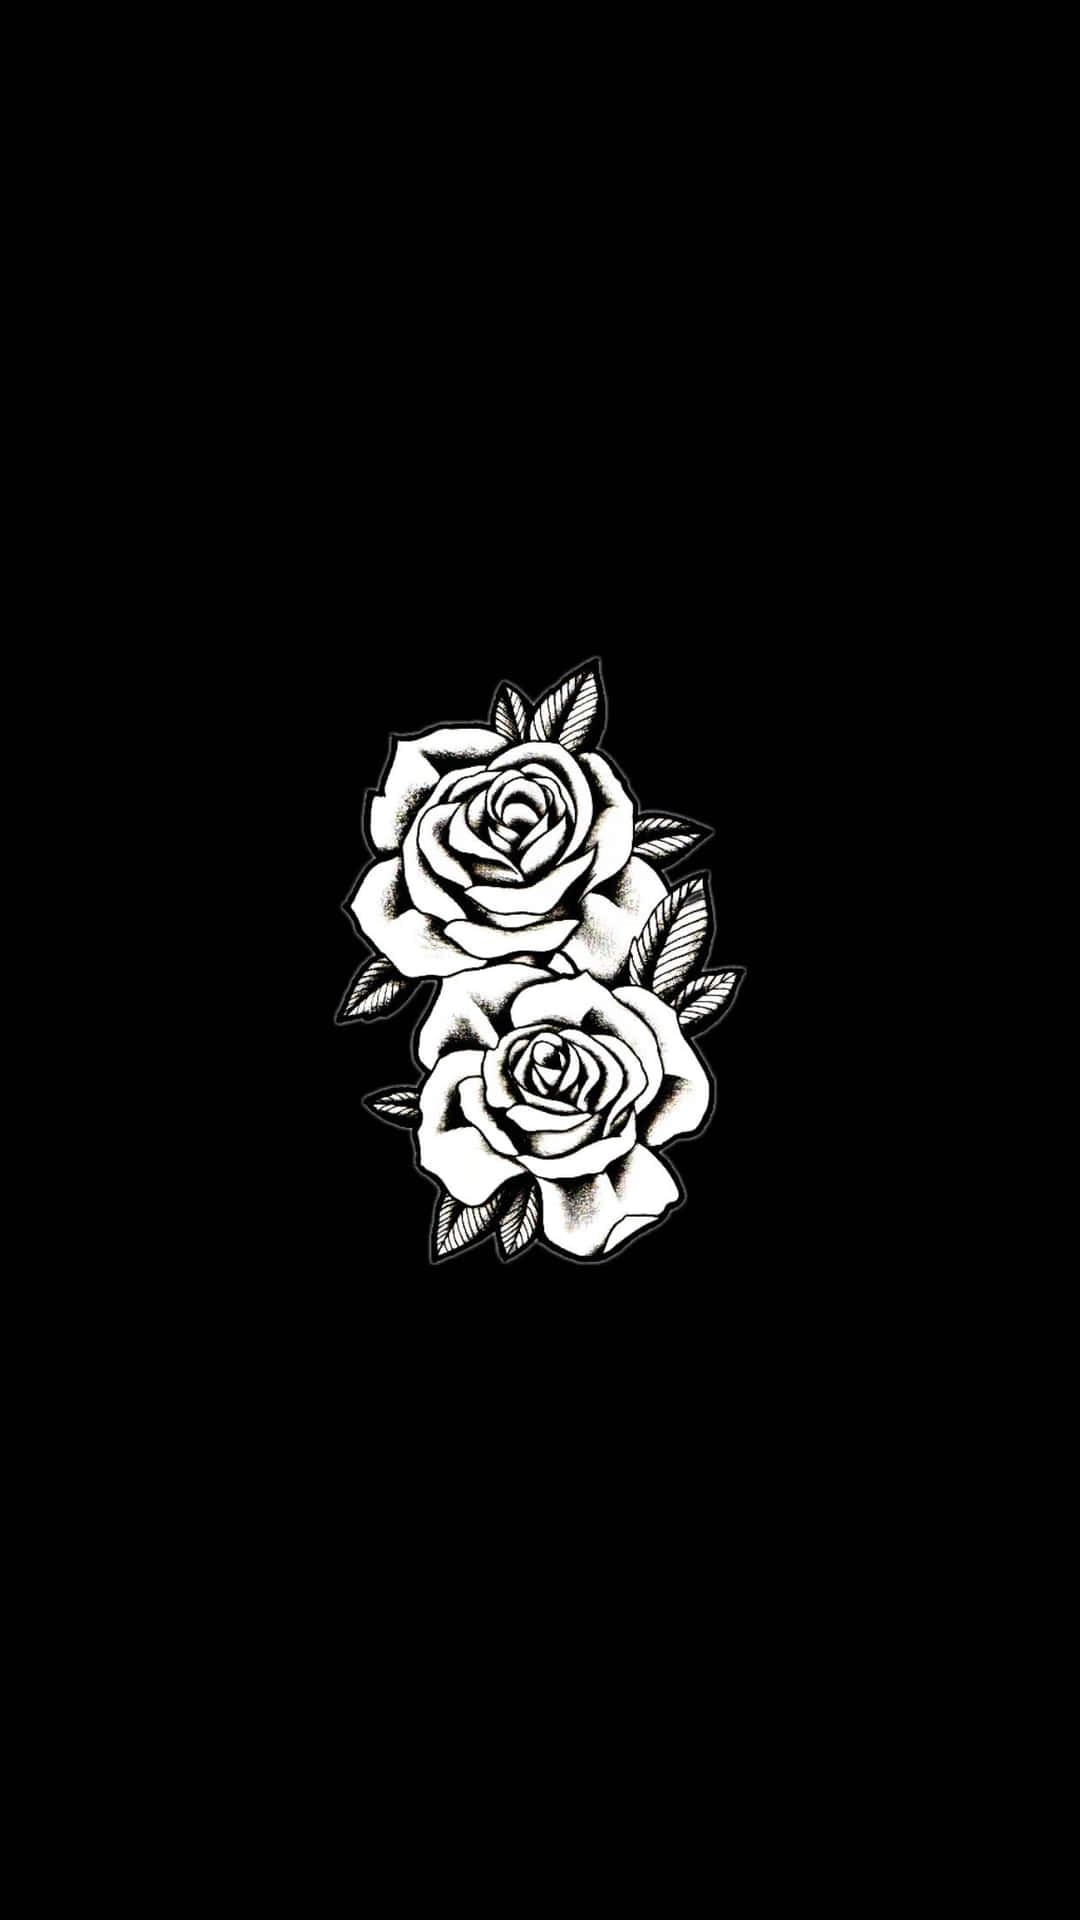 A Black Background With Two Roses On It Wallpaper